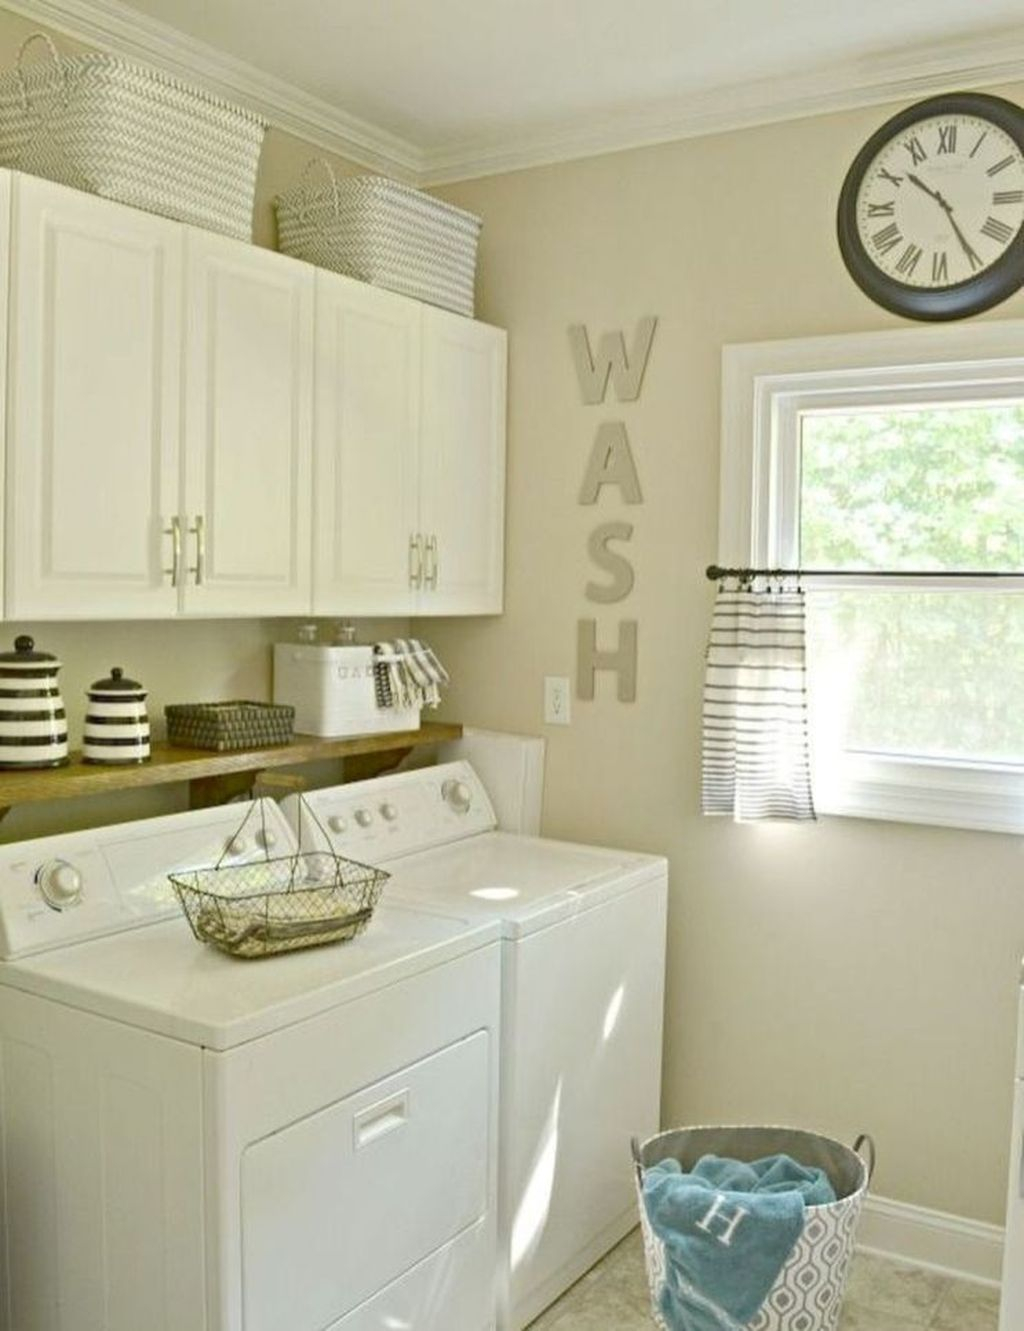 30+ Favored Laundry Room Organization Ideas To Try